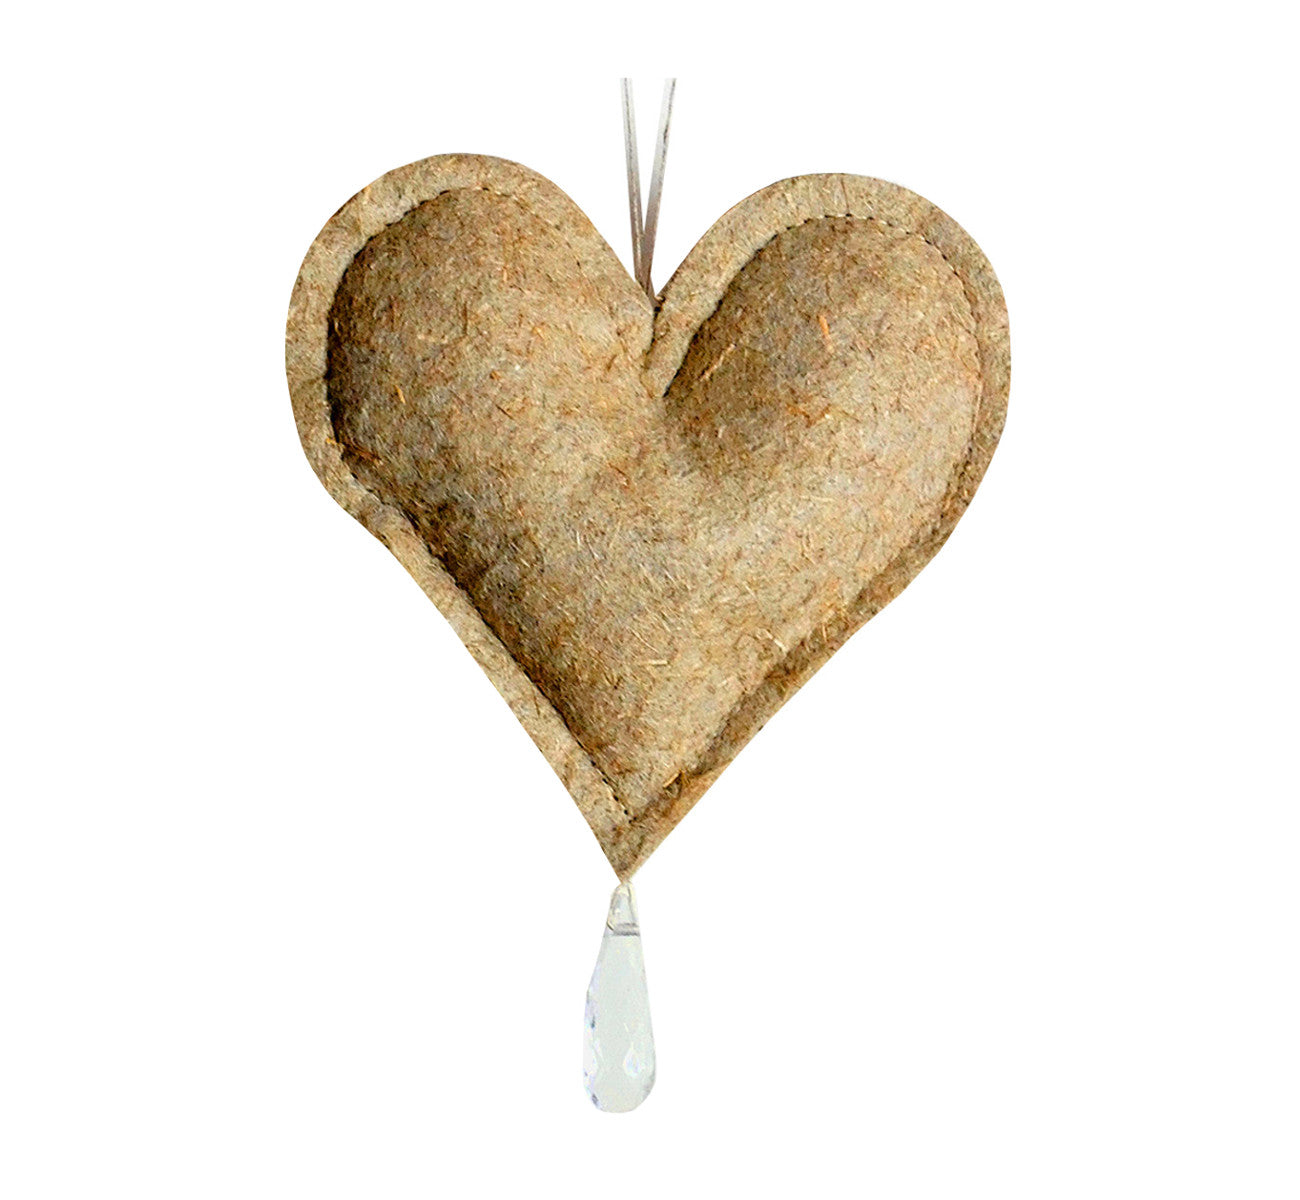 Decorative stuffed heart with crystal stone, natural flax felt, light brown, 10x8 cm, 3.94x3.15”, handcrafted.